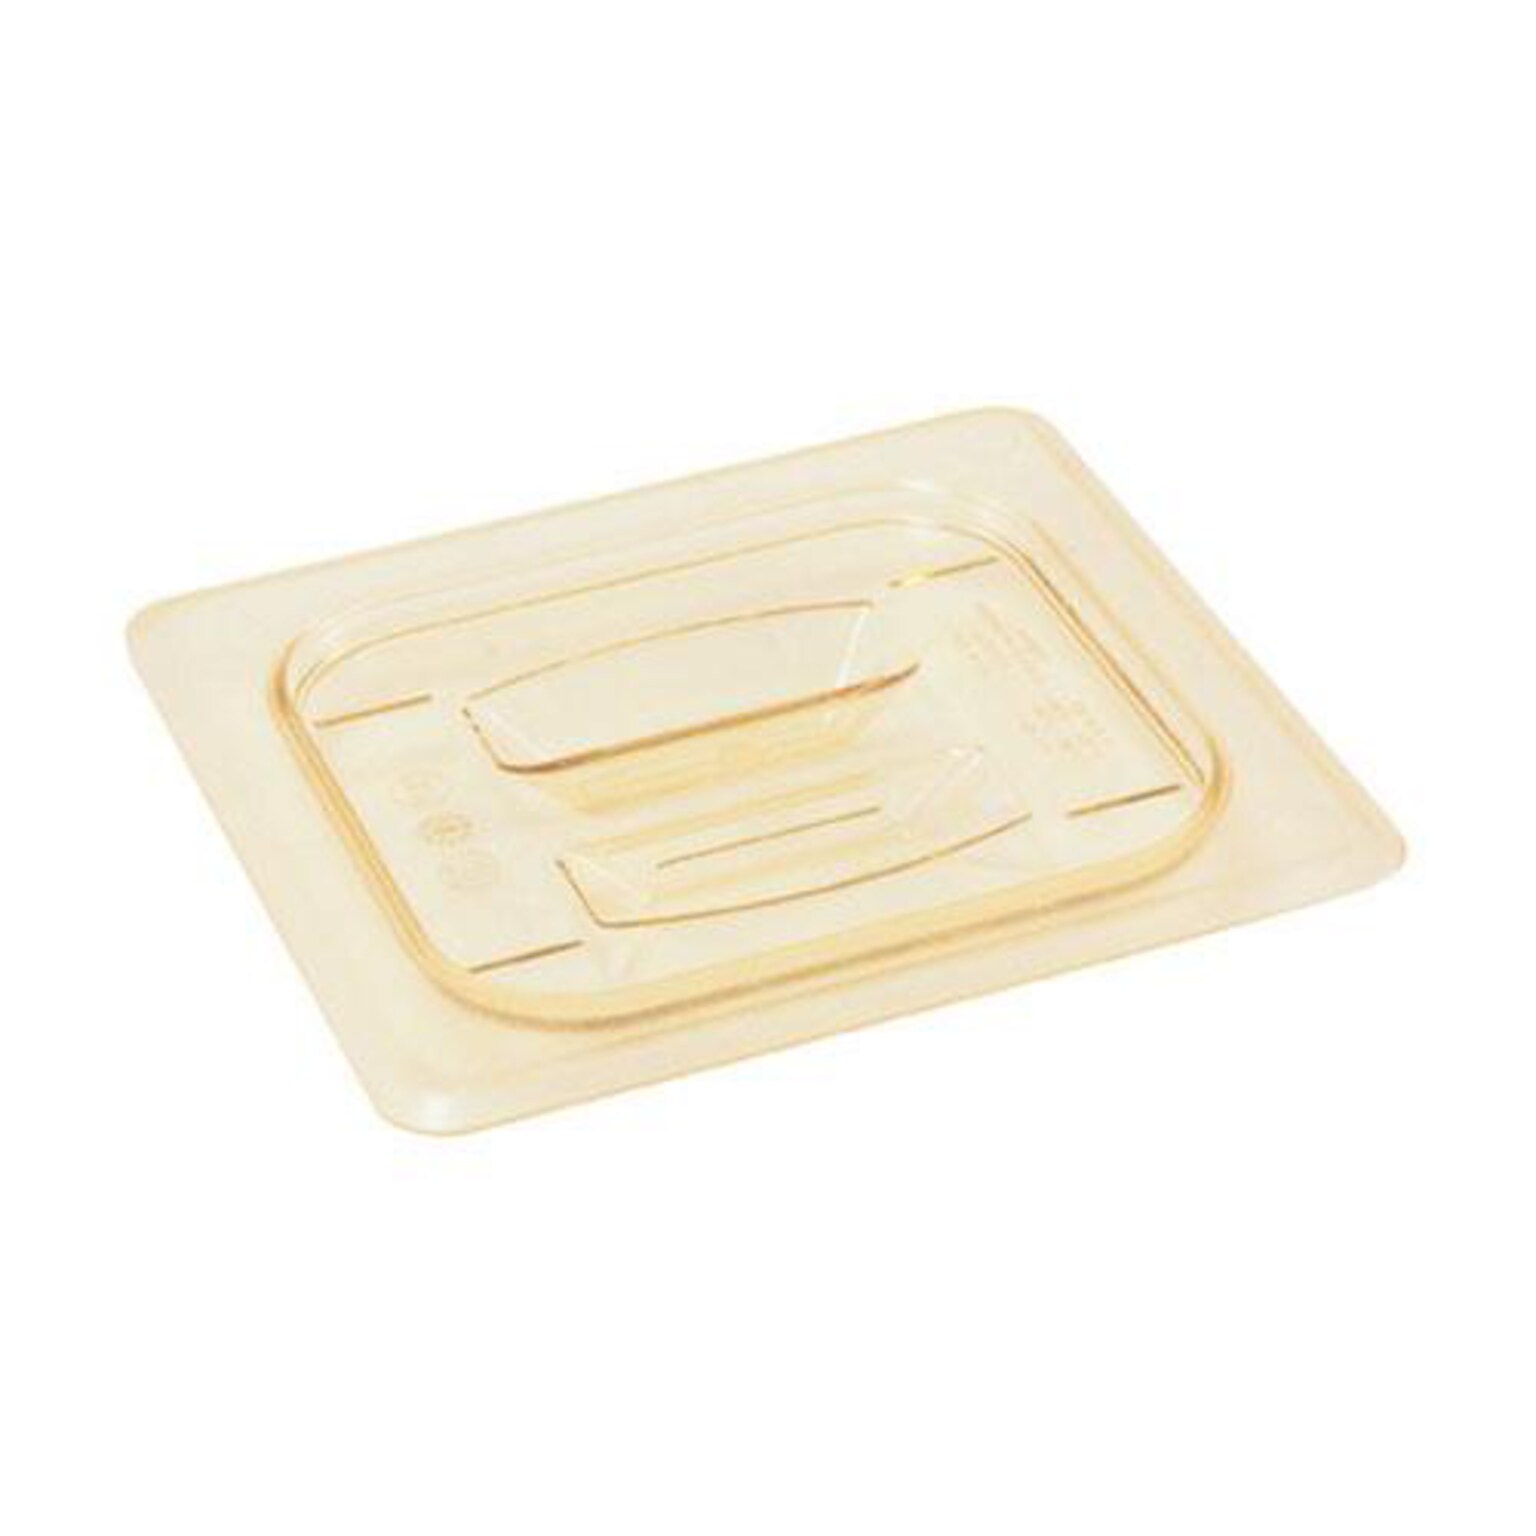 Cambro 1/6 H-Pan Cover Lid, Amber, Pack of 6 (78960)